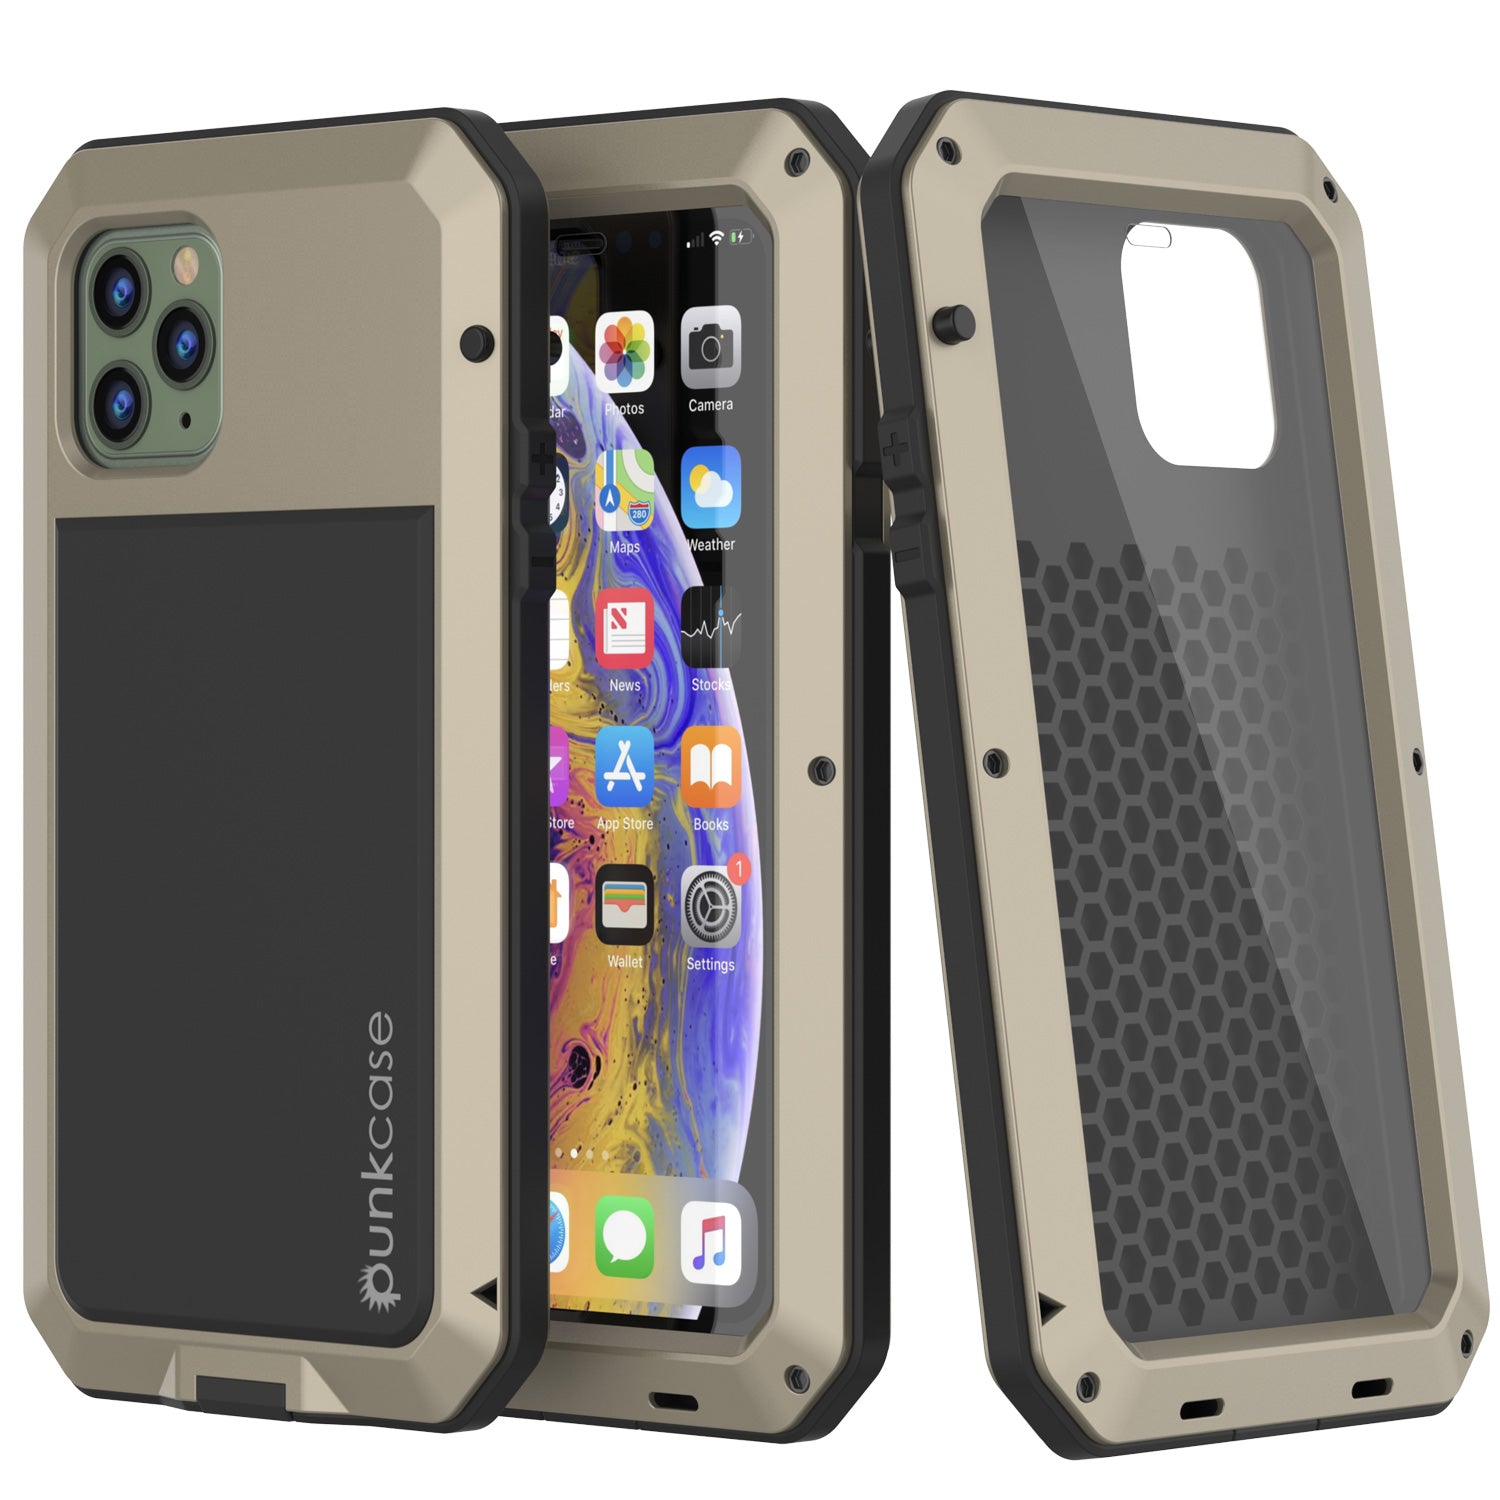 Metal Steel Machinery Series Cases For iPhone 11 Pro Max Heavy Duty Armor  Aluminum For iPhone 11 iPhone11 Pro Max CASE Cover - AliExpress